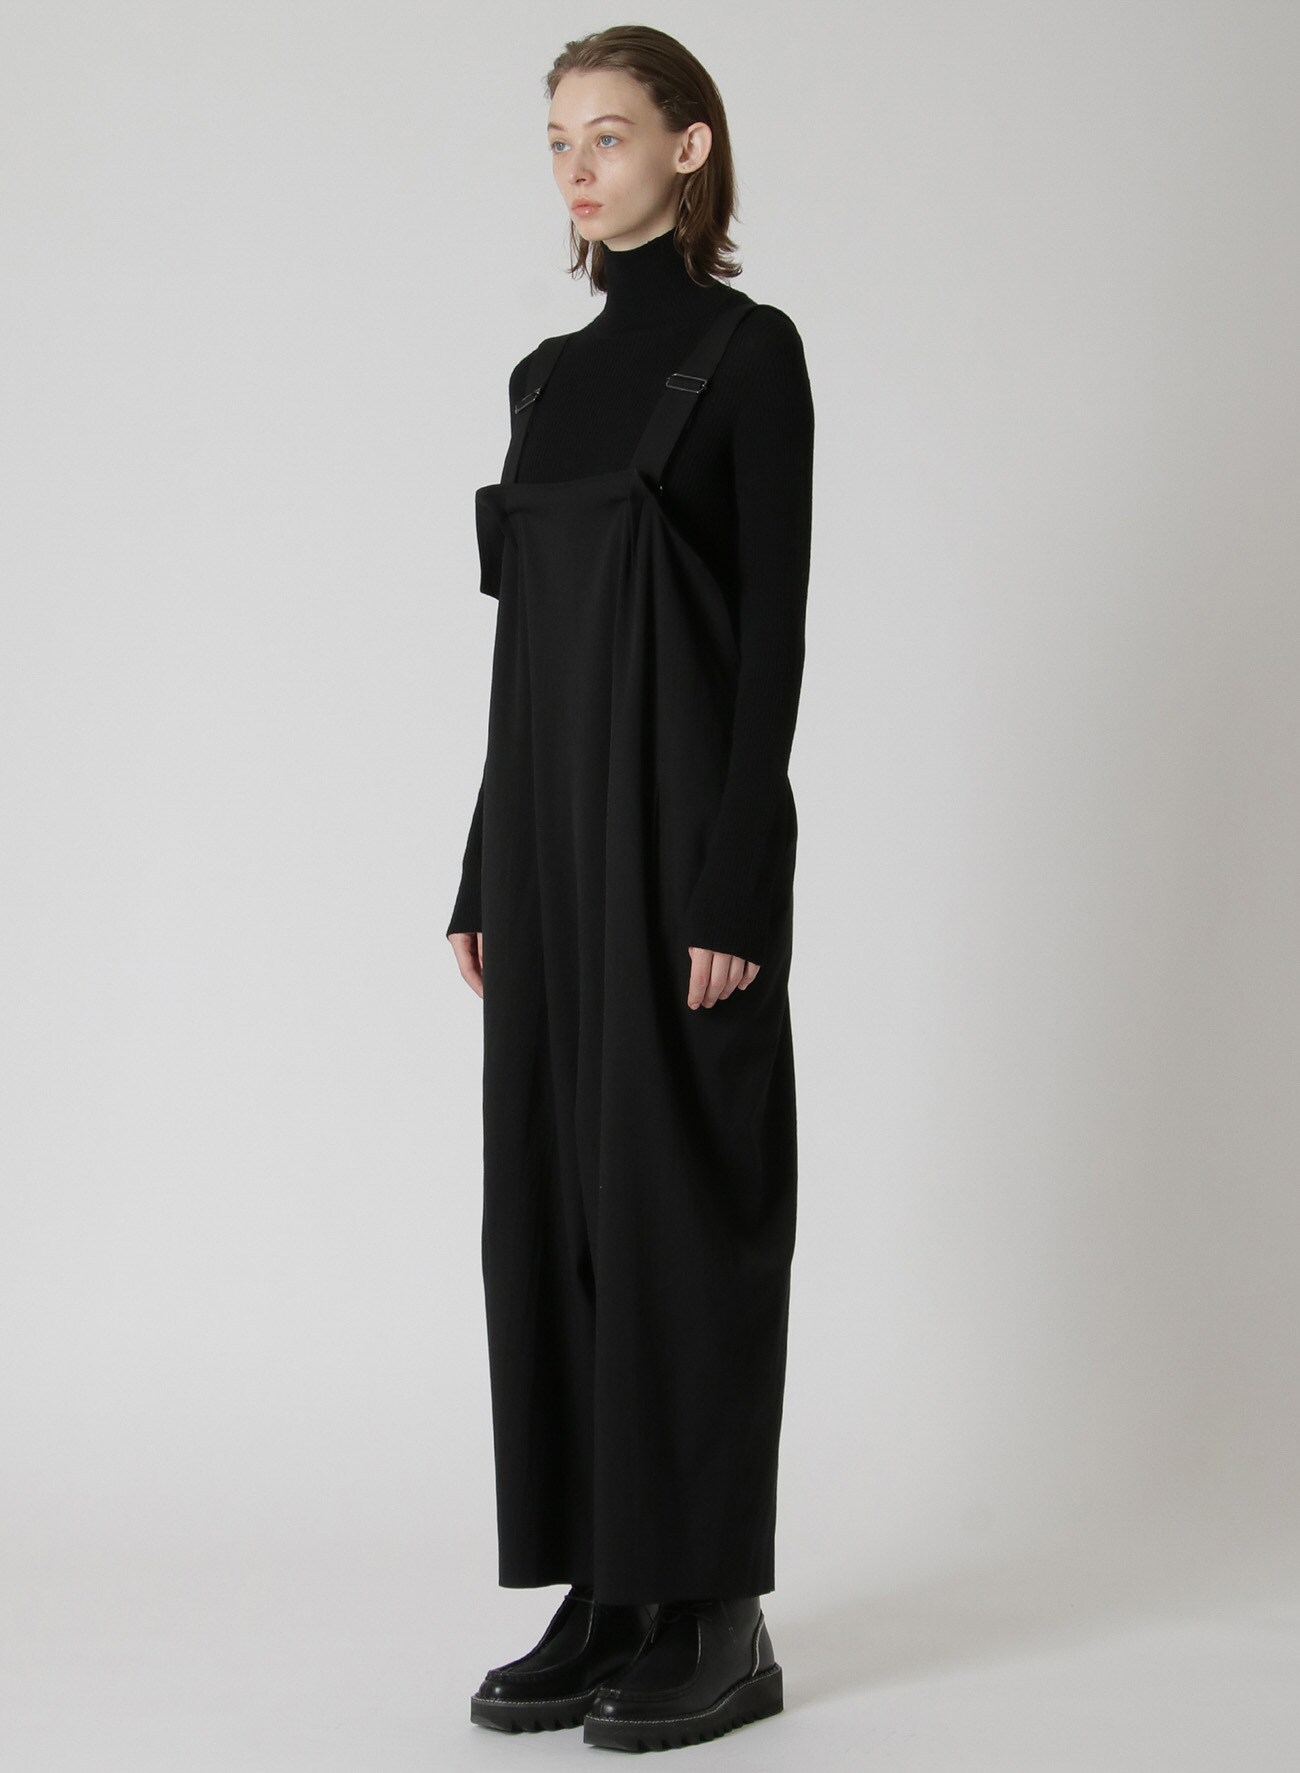 WRINKLED WOOL/RAYON TWILL SALOPETTES(XS Black): Y's｜THE SHOP